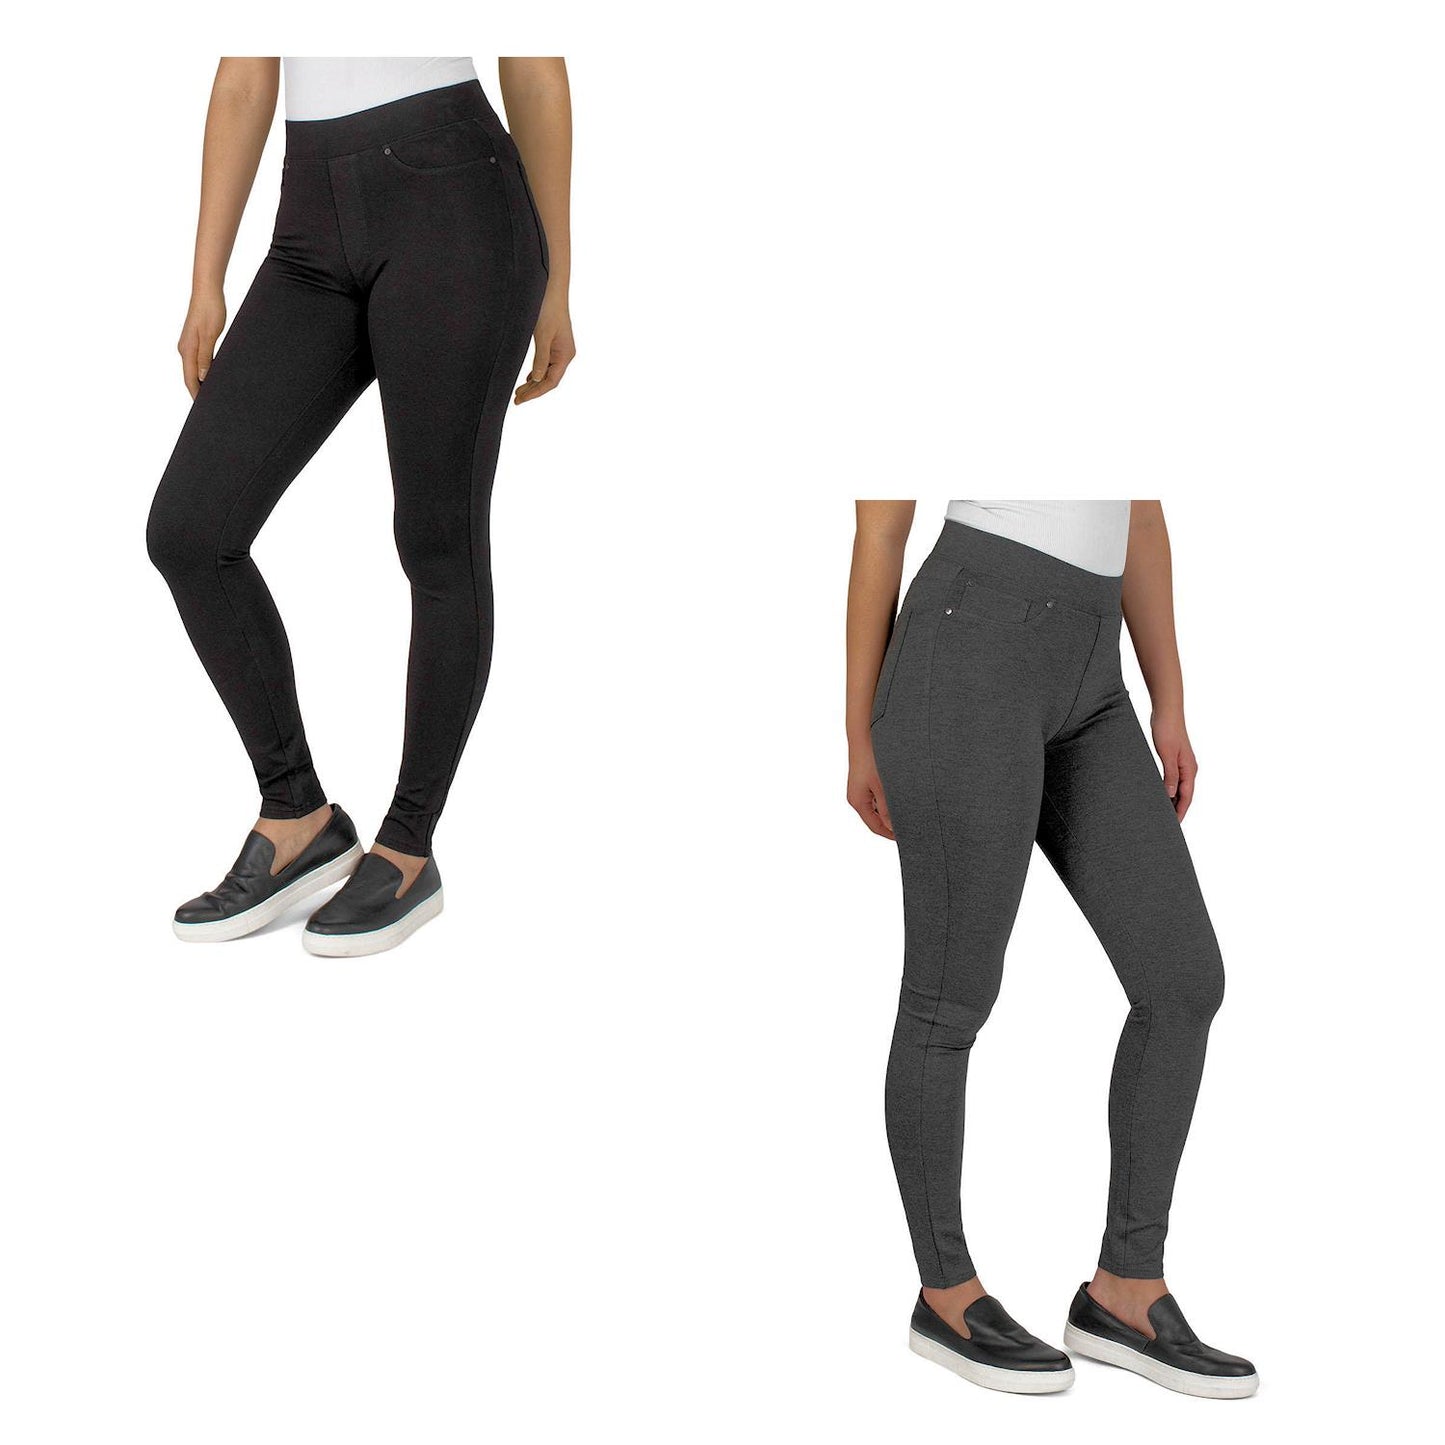 Seven7 Women's Pull On 4-Way Stretch Skinny Fit Ponte Legging Pants Choose Color Size